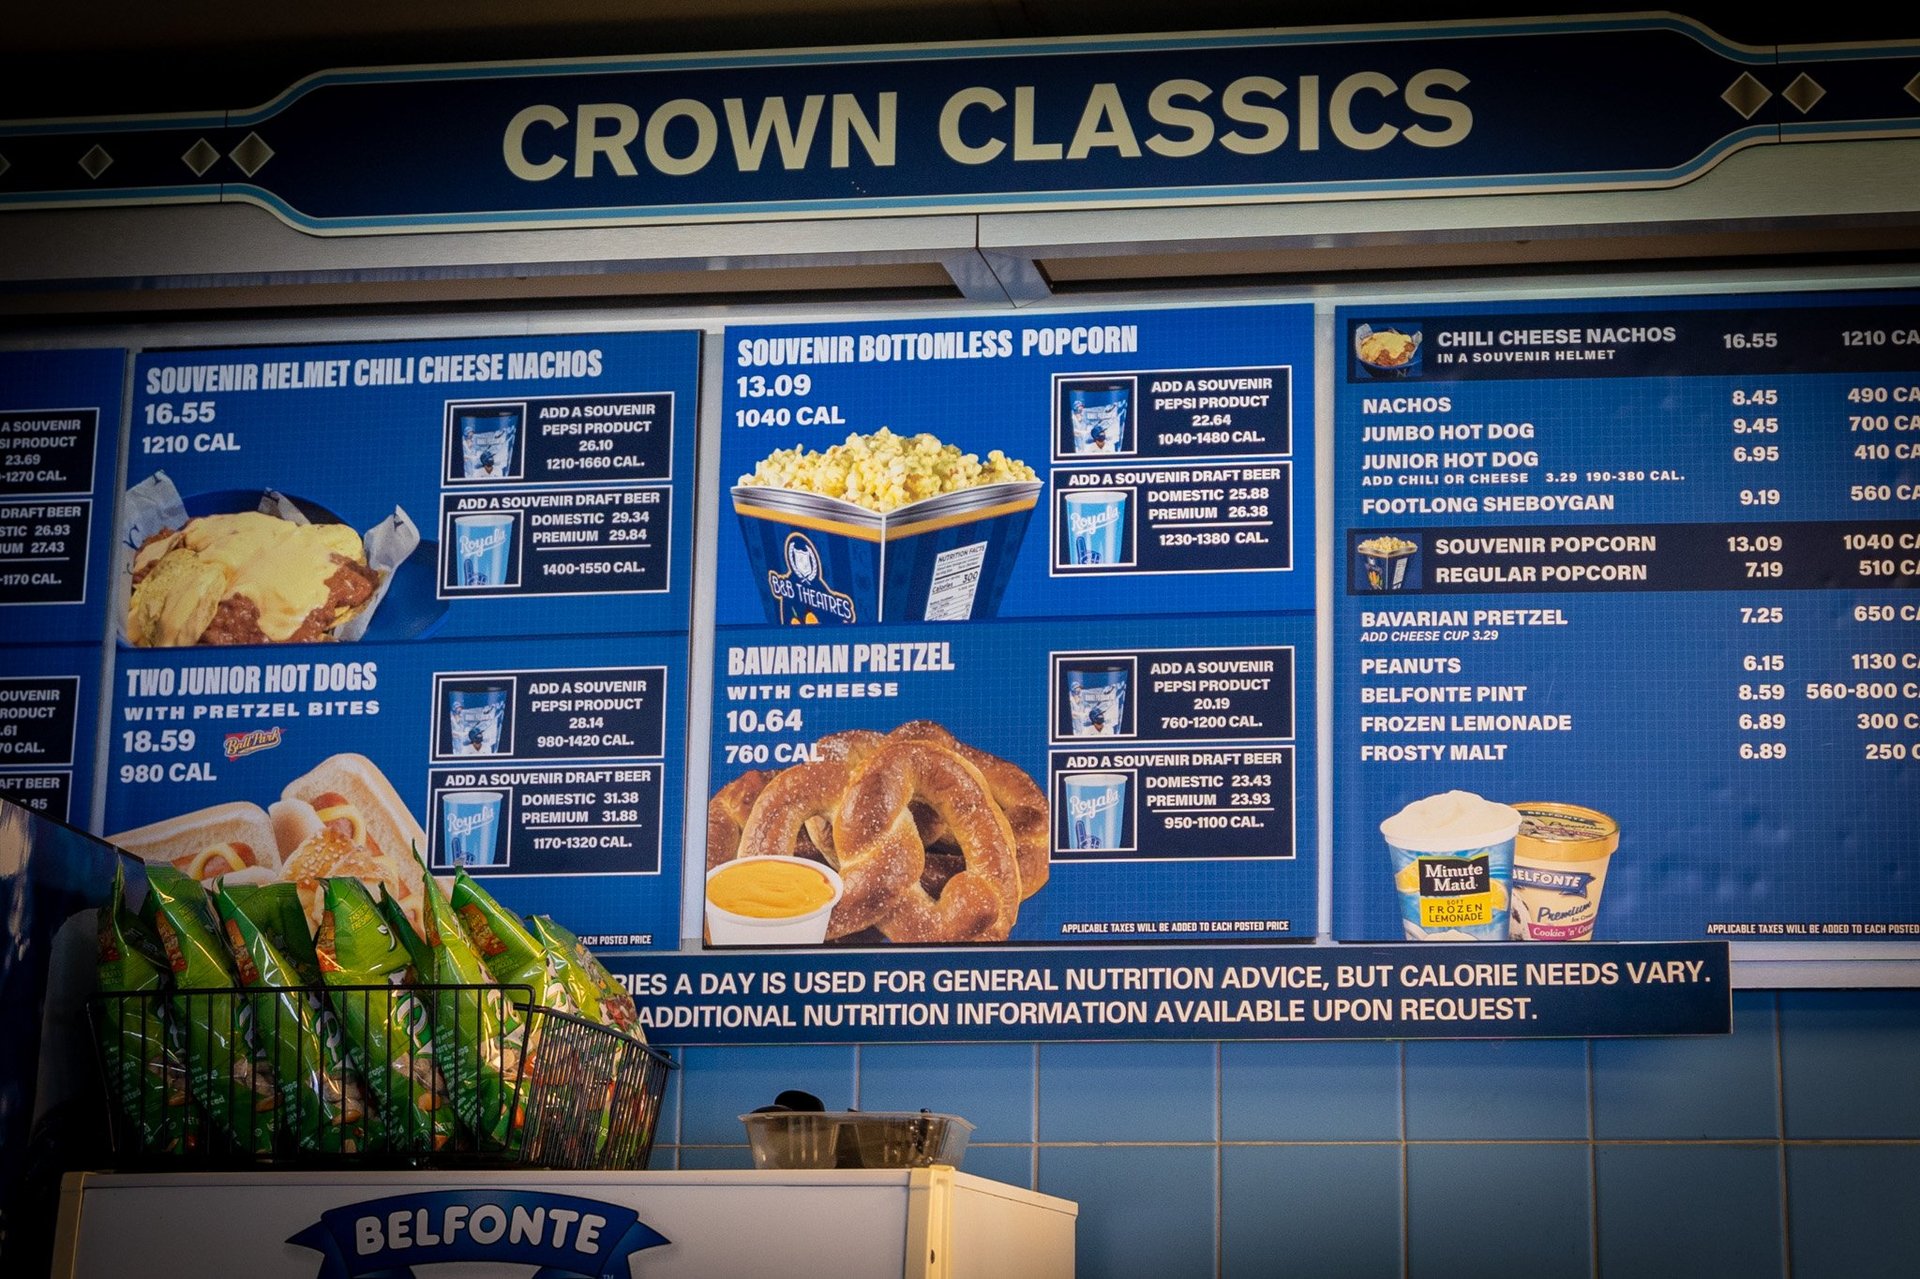 Concession Menu at Kauffman Stadium showing the Can of Corn 